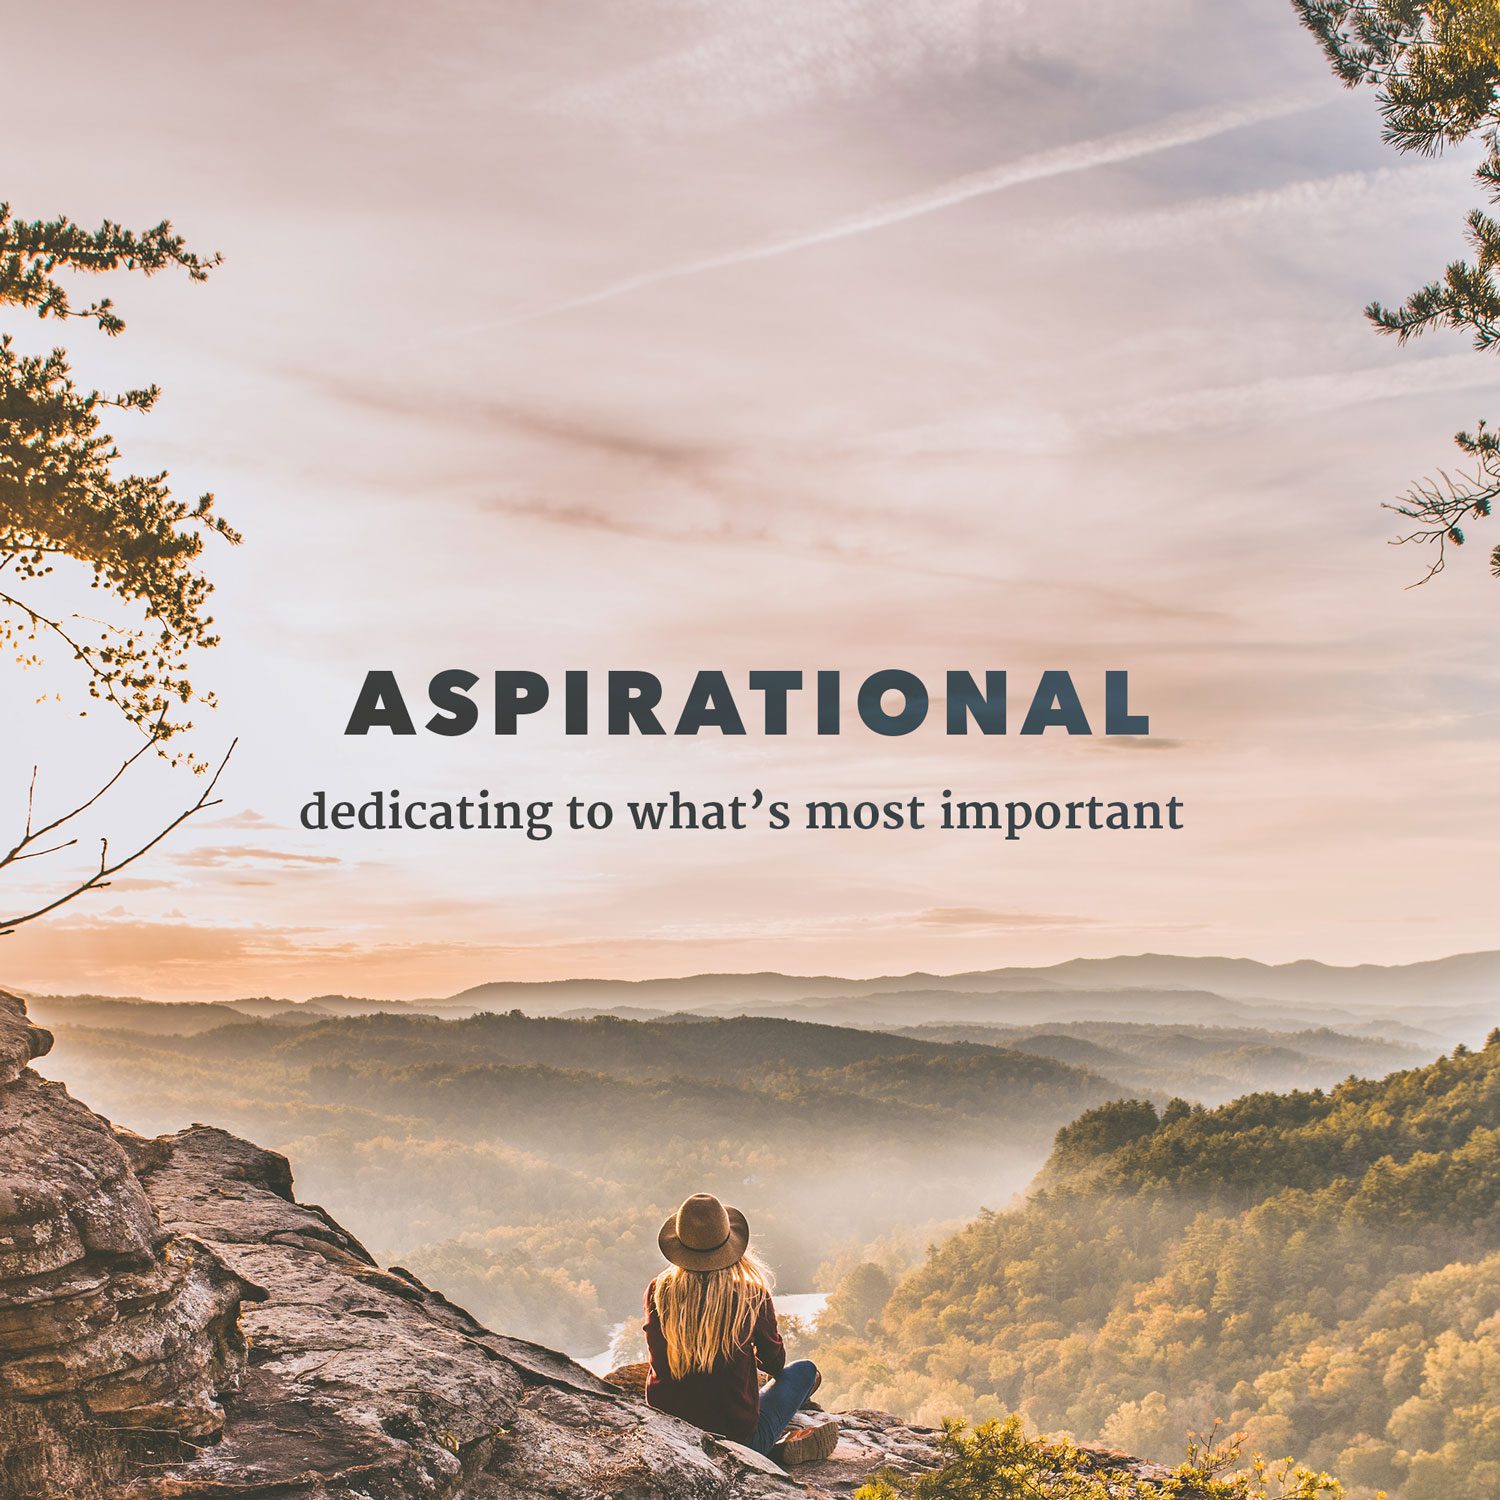 ASPIRATIONAL - dedicated to what's most important